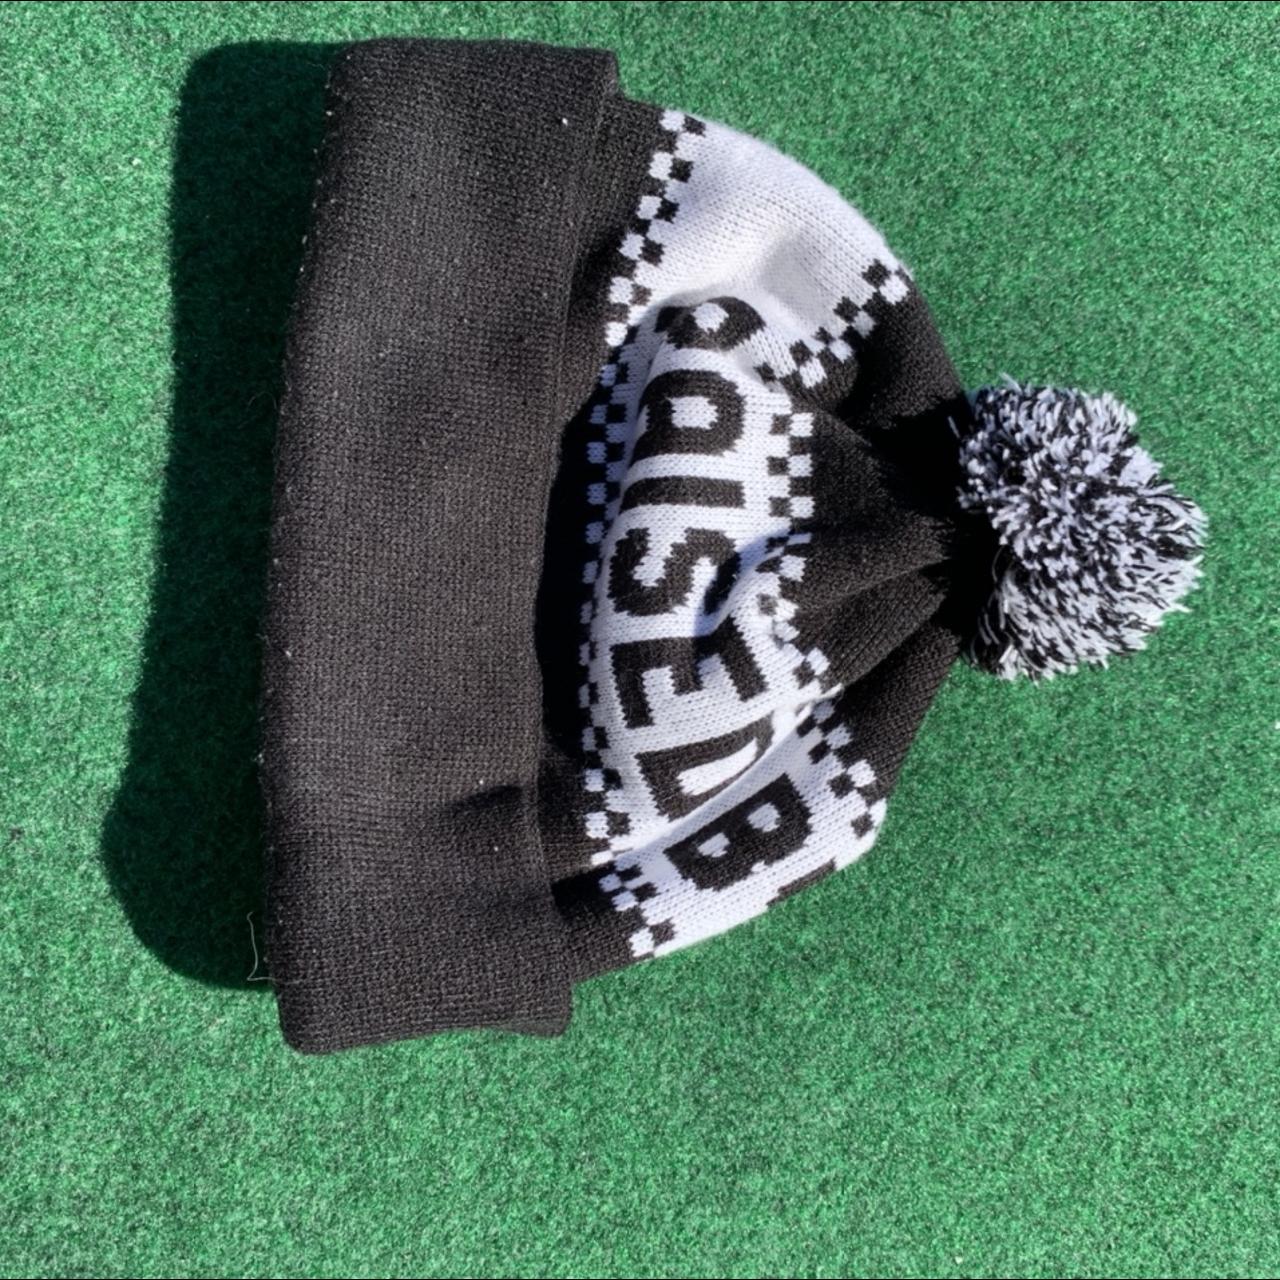 Product Image 2 - Raised By wolves beanie 
#beanies
#retro
#asaprocky
#coldweather